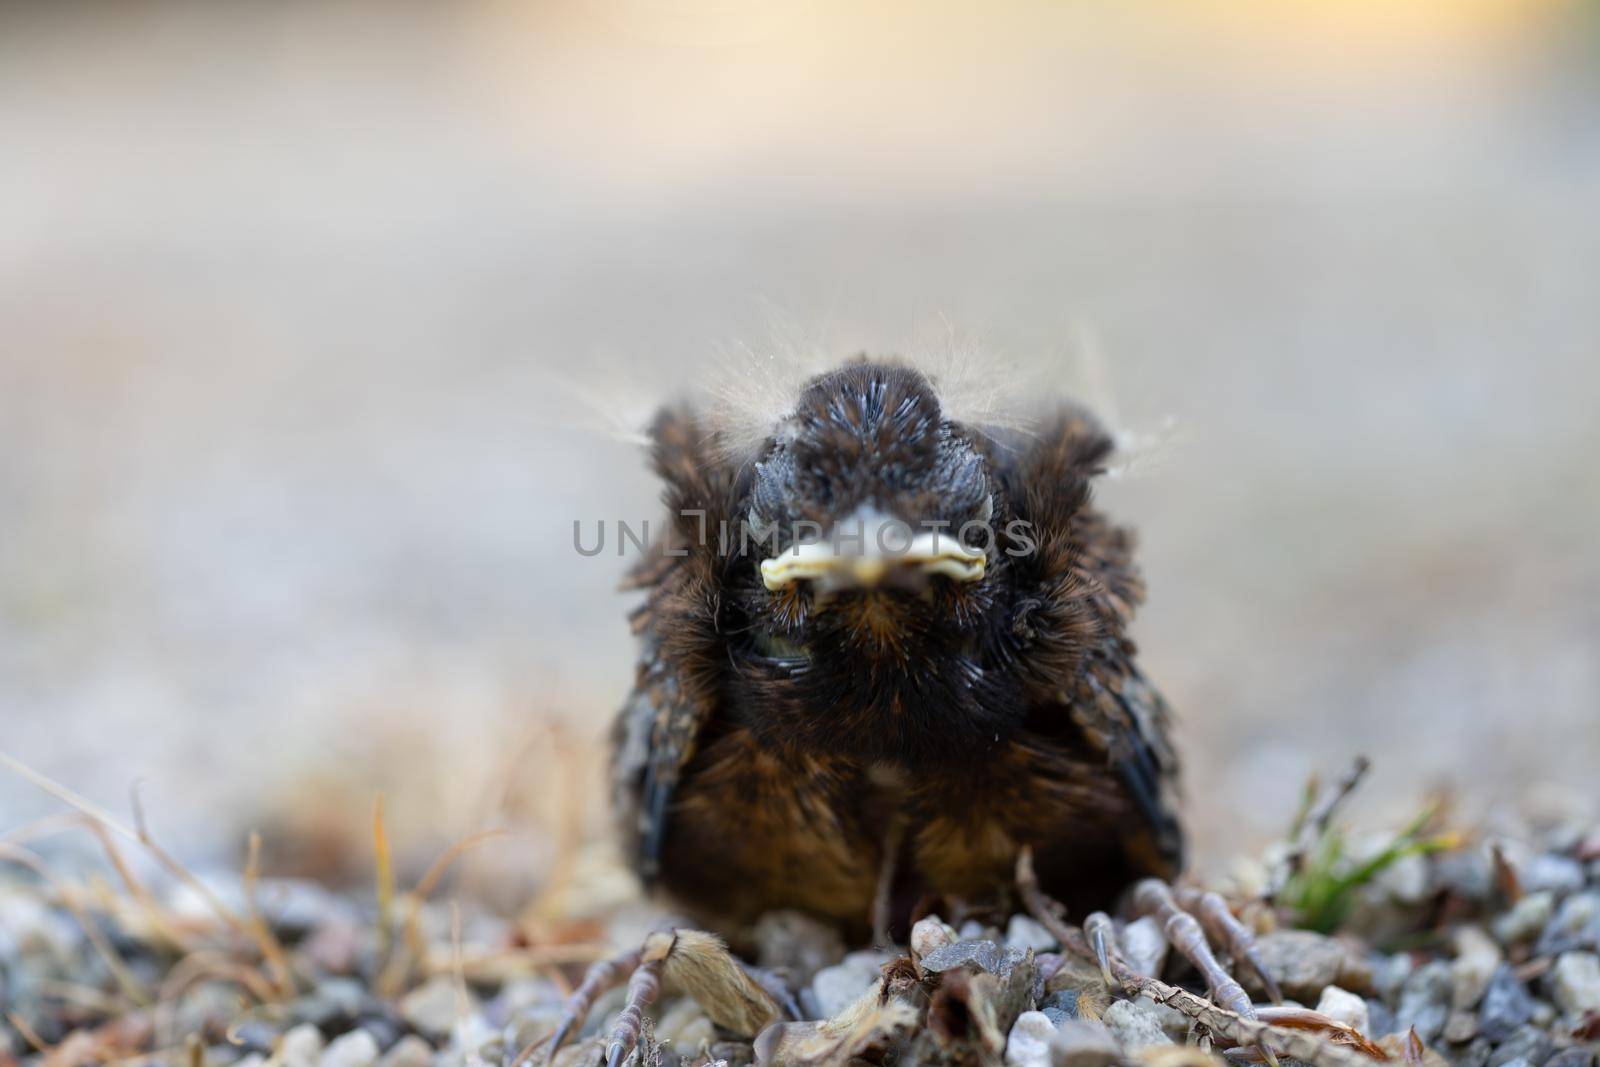 Close up of a young Blackbird (Turdus merula) after falling out of the nest